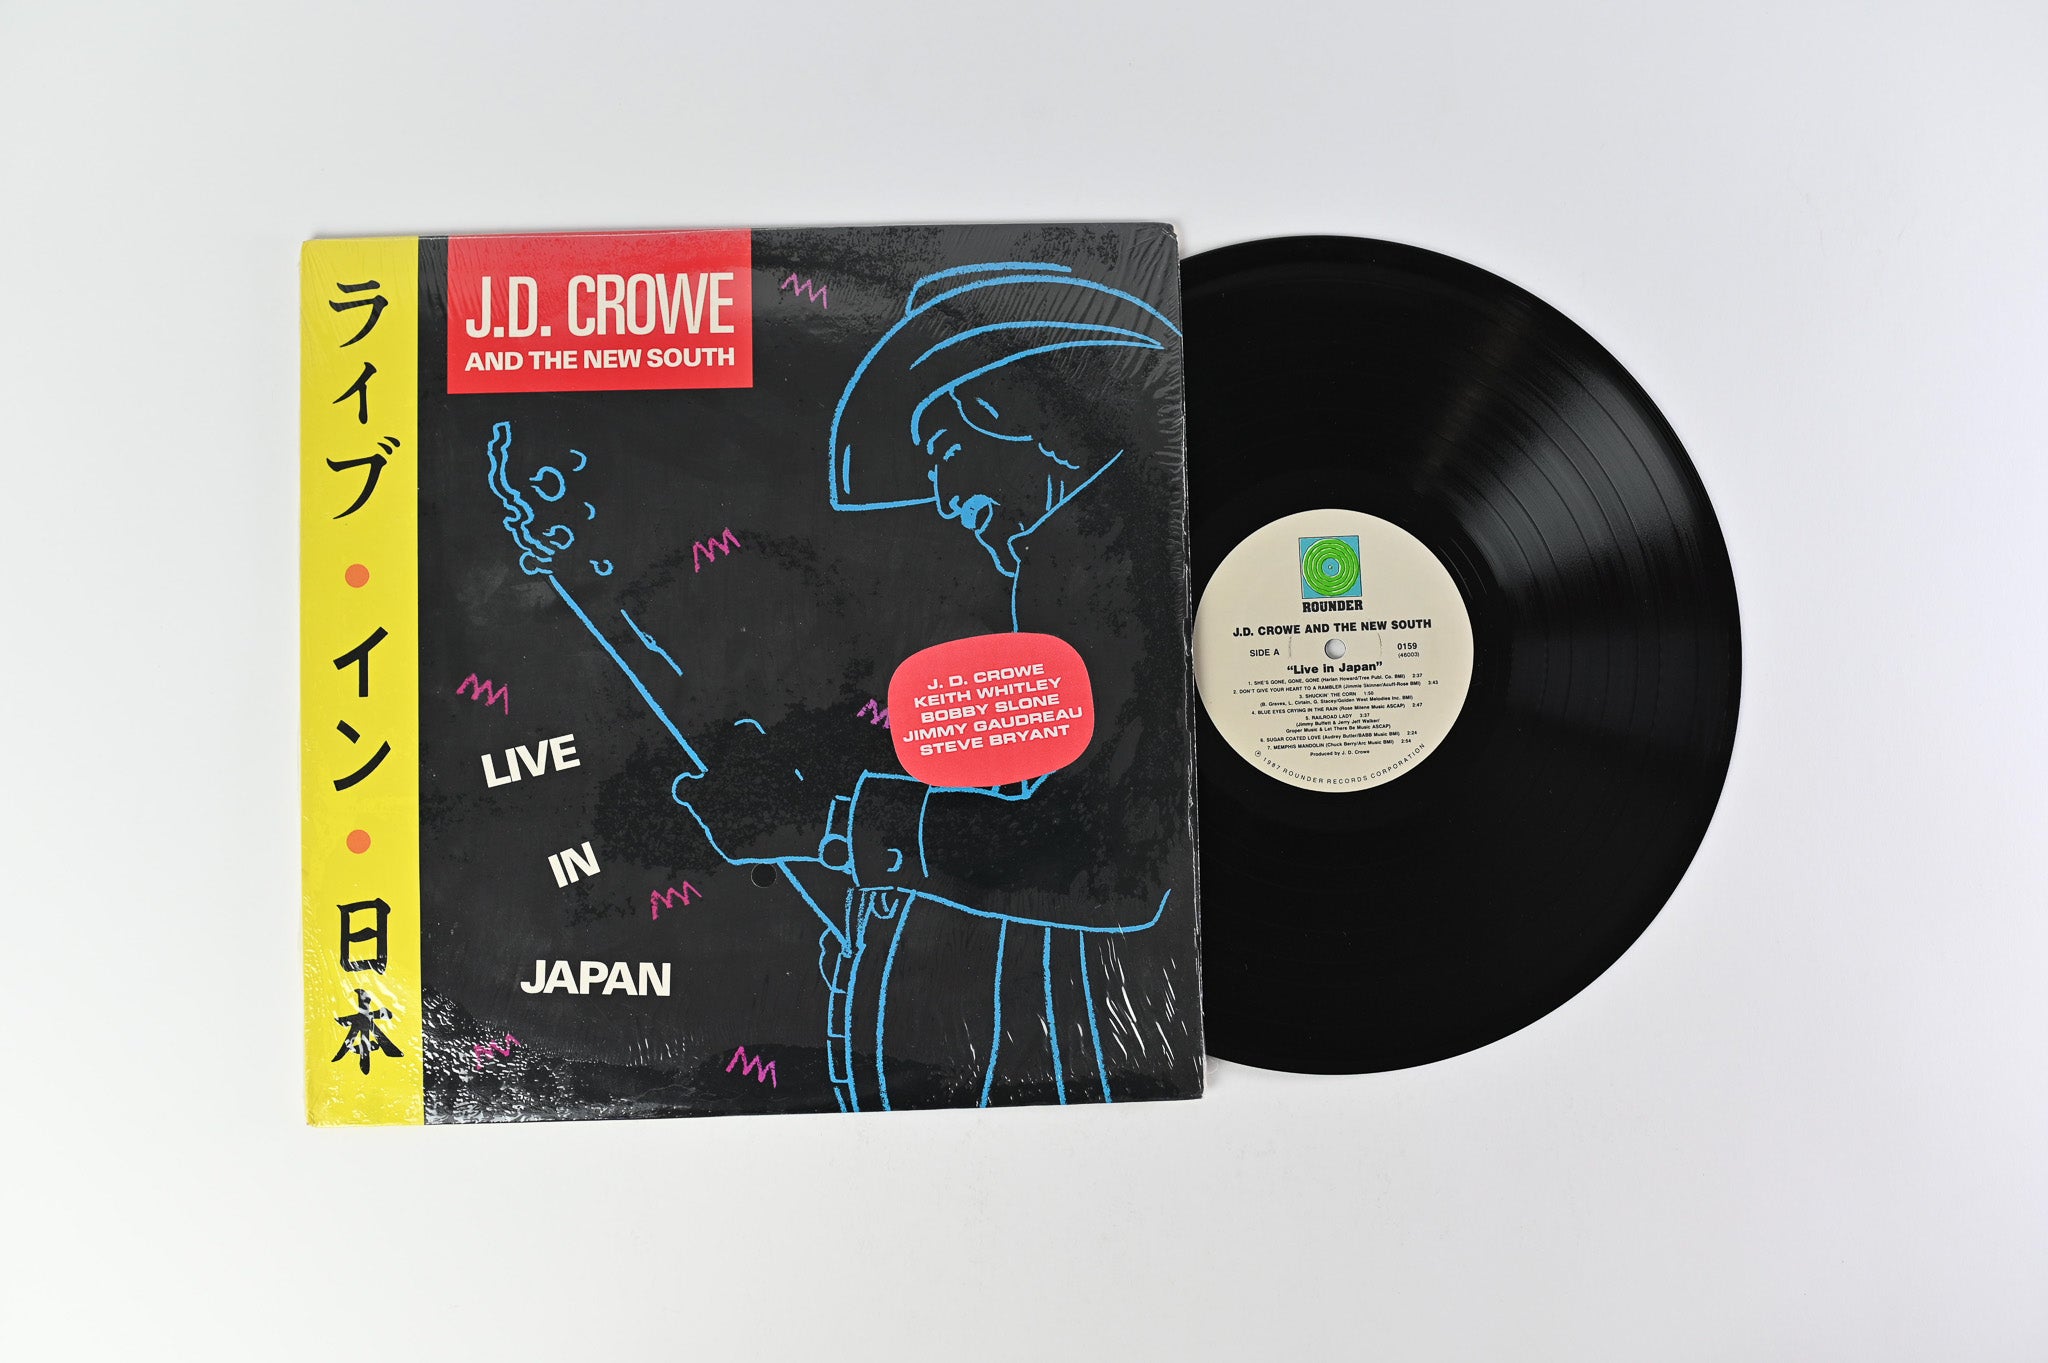 J.D. Crowe & The New South - Live In Japan on Rounder